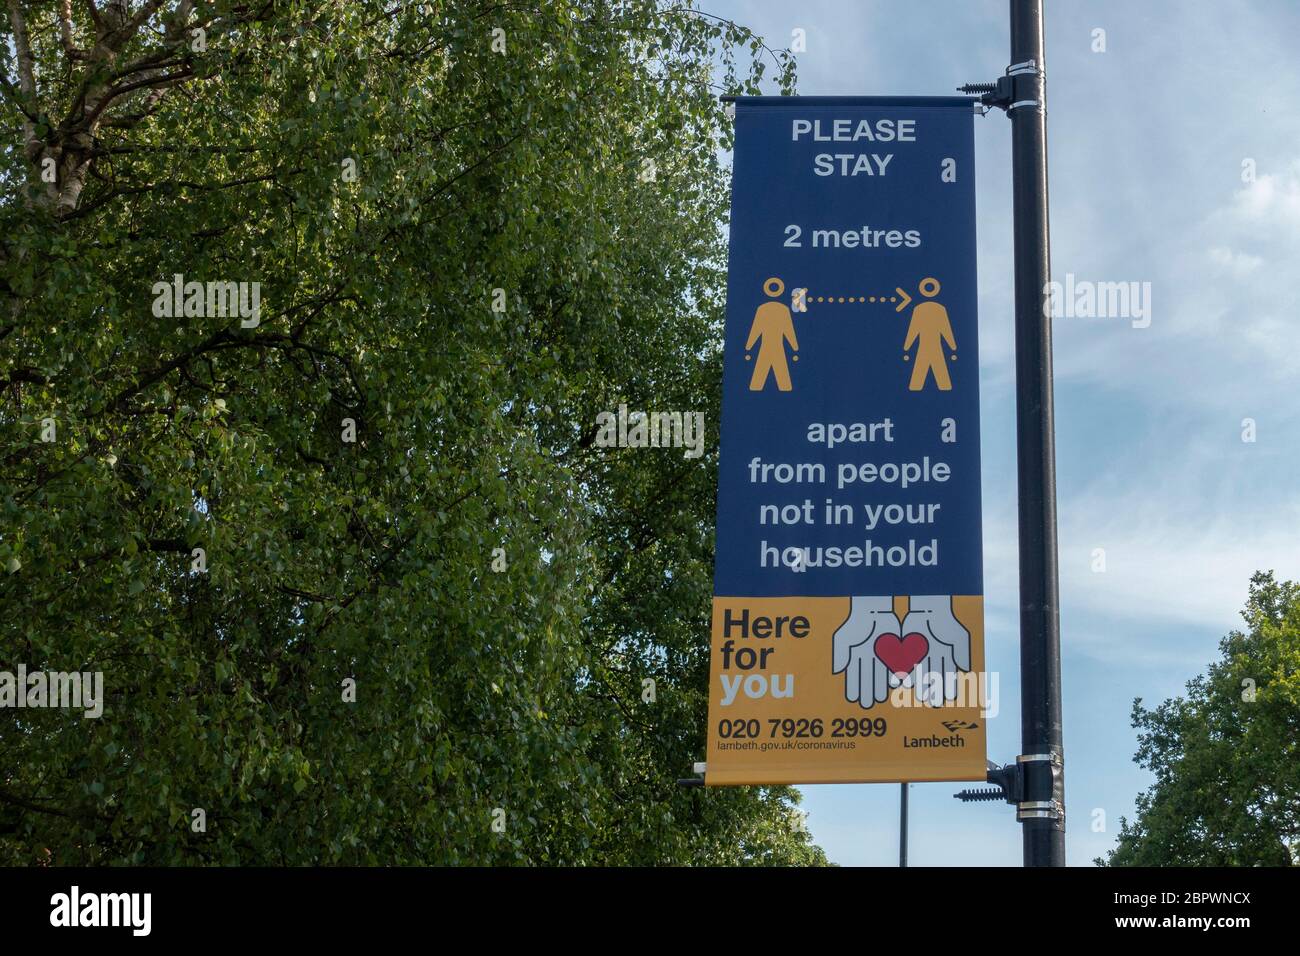 West Norwood, UK. 15th May, 2020. A social distancing advice sign hanging from a lamppost in West Norwood in South London. photo by Sam Mellish Stock Photo